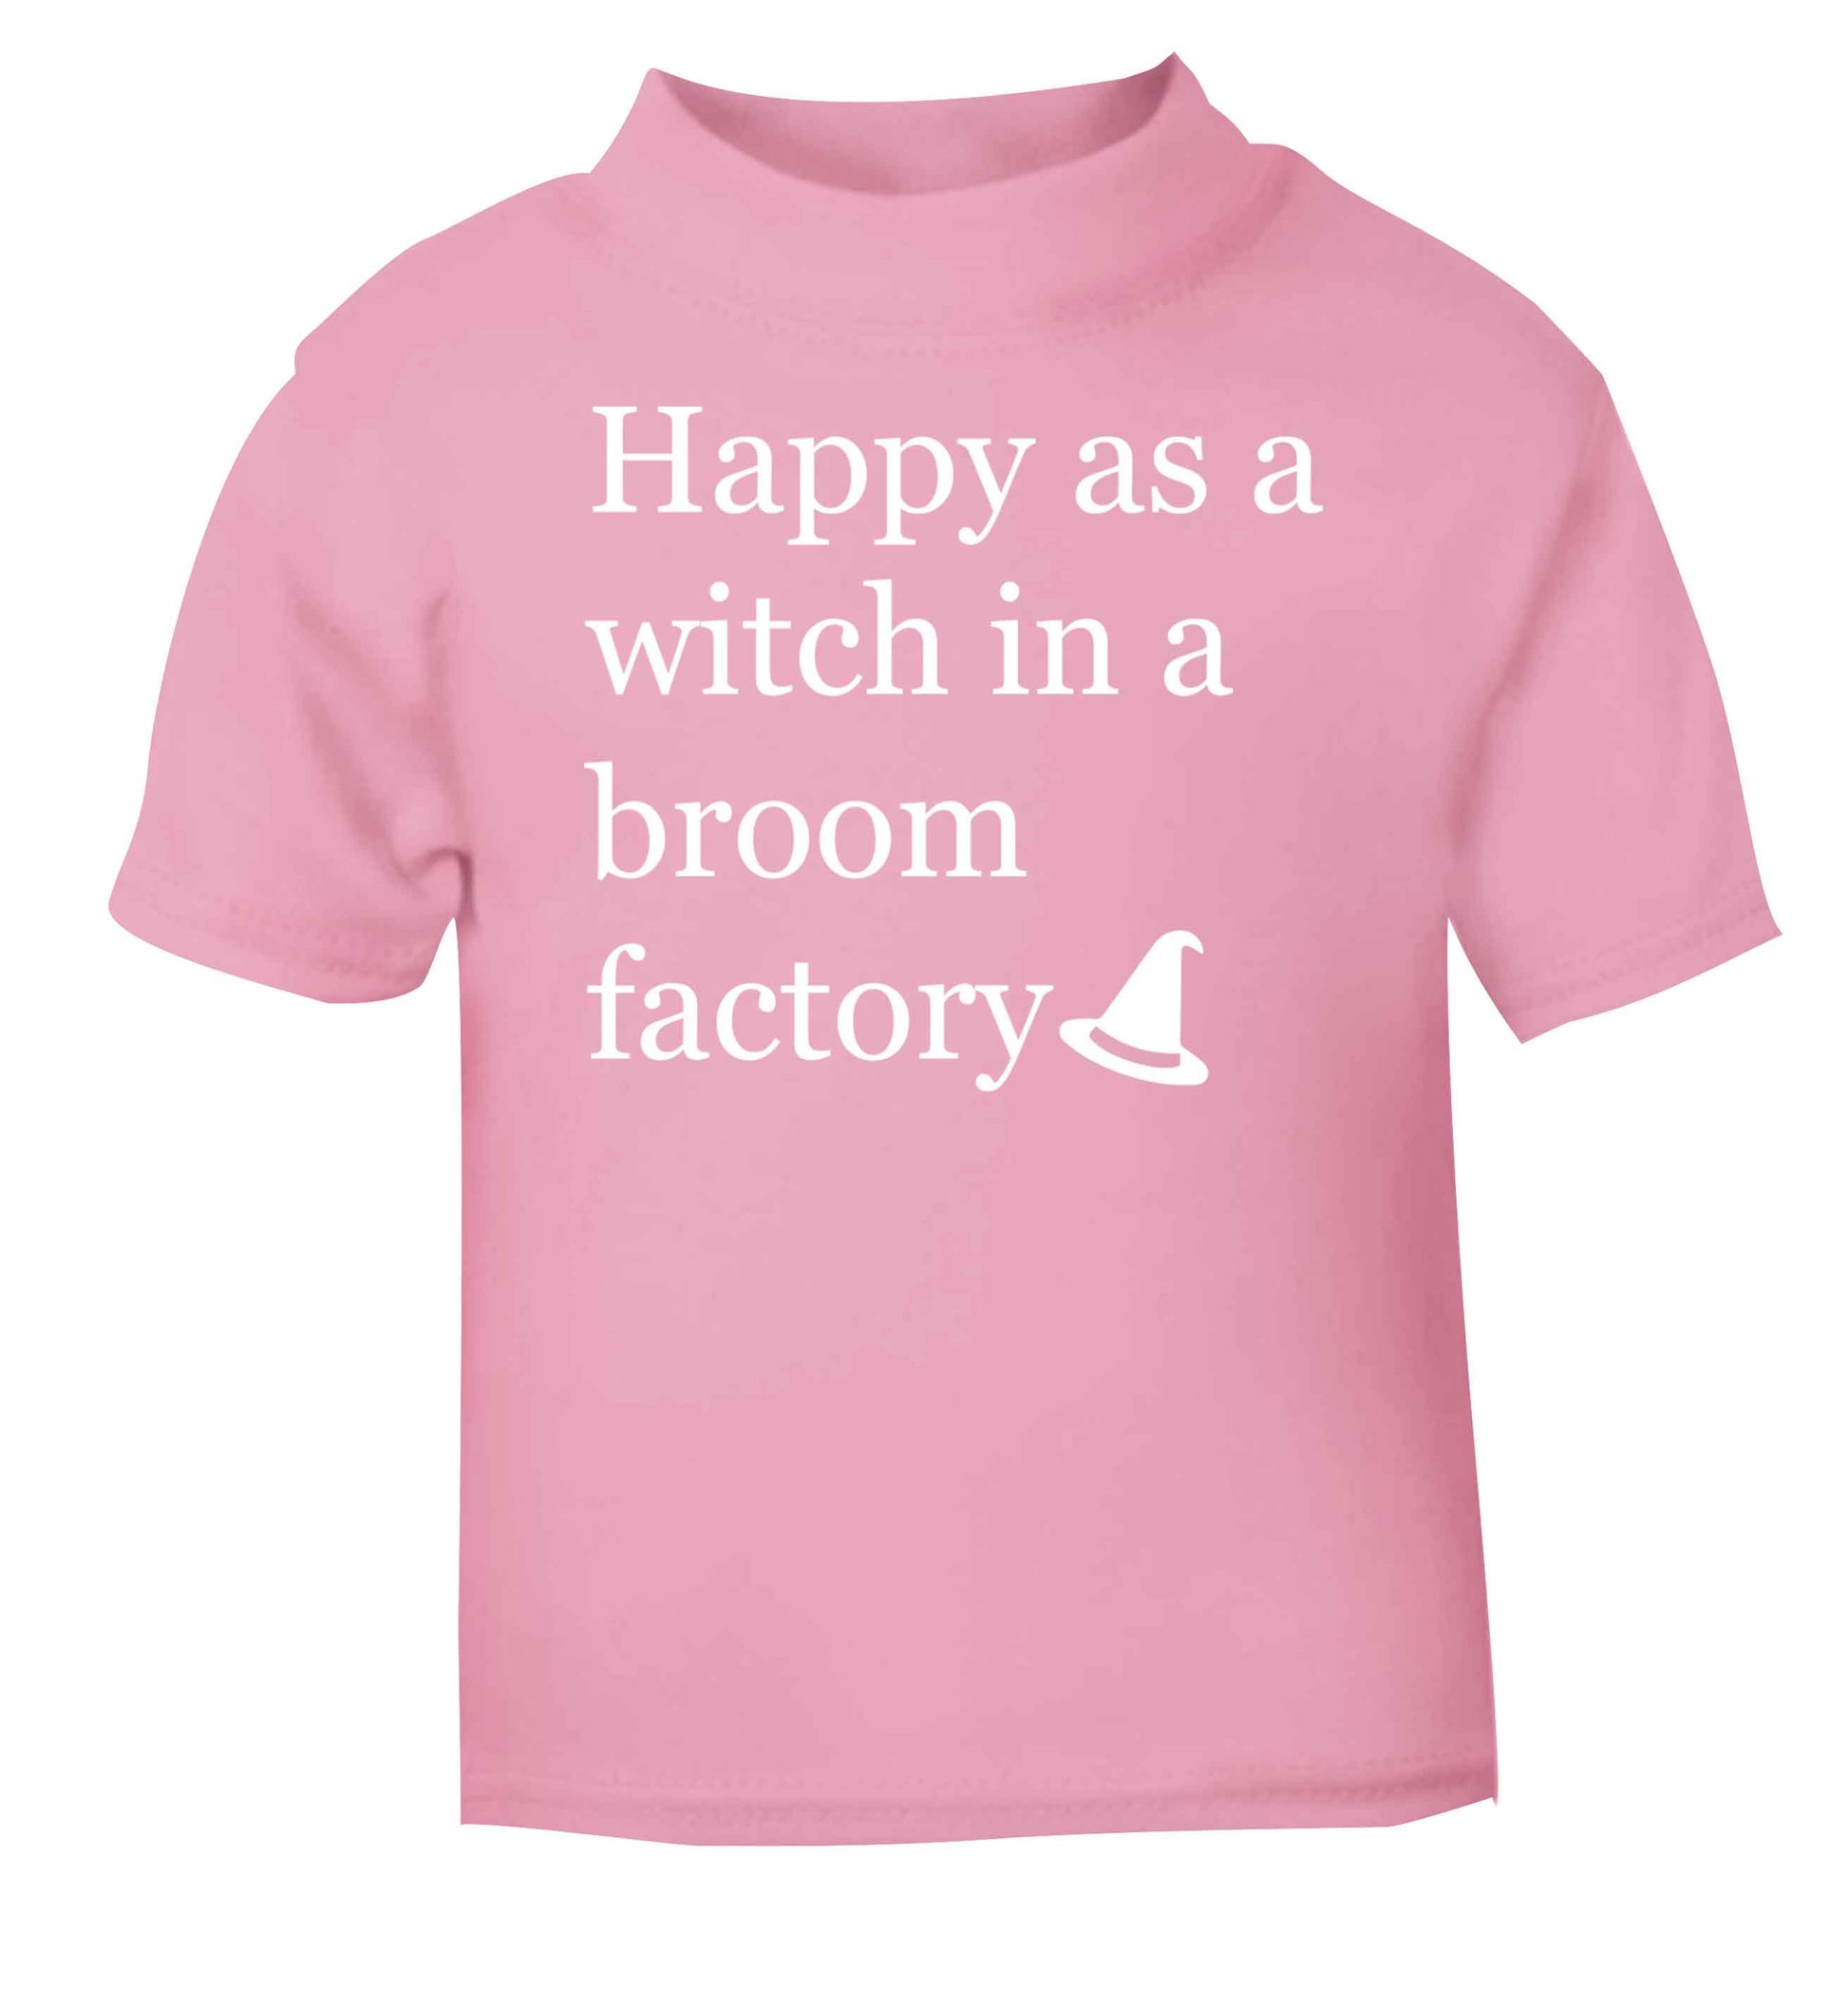 Happy as a witch in a broom factory light pink baby toddler Tshirt 2 Years